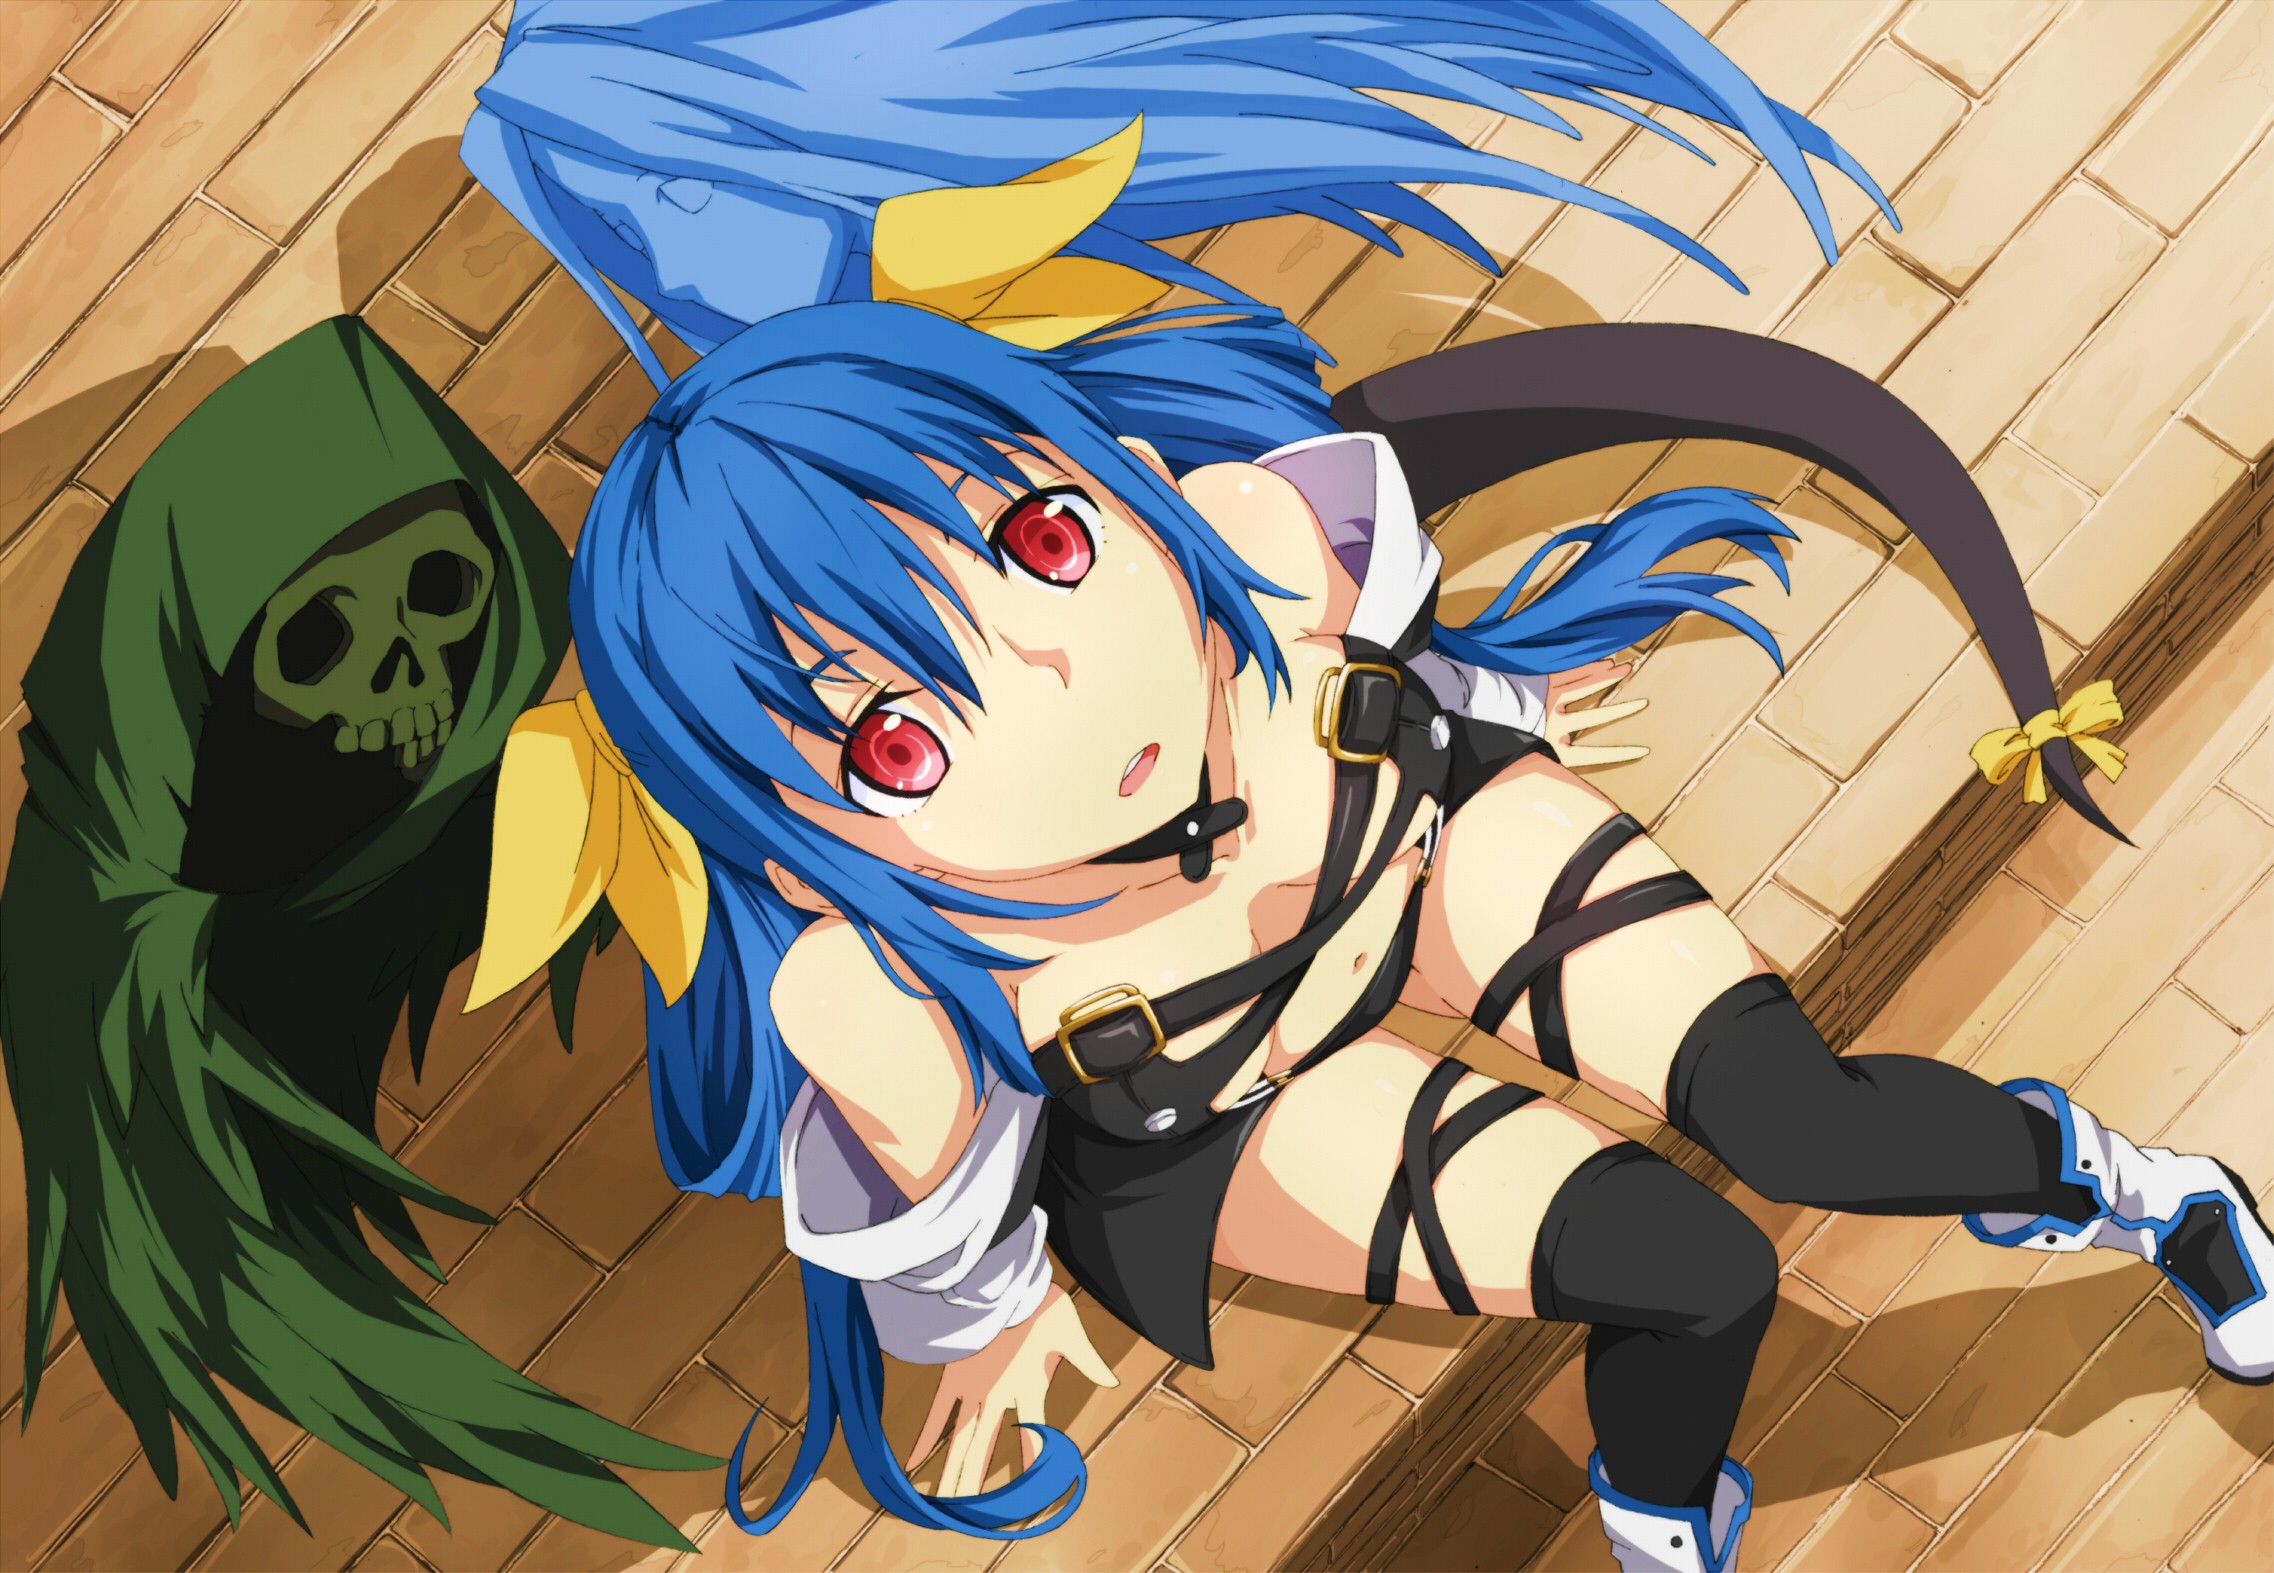 Anime 2274x1573 anime artwork anime girls Guilty Gear Dizzy (Guilty Gear) blue hair red eyes thigh-highs Fear (People) long hair looking up skull sitting boobs